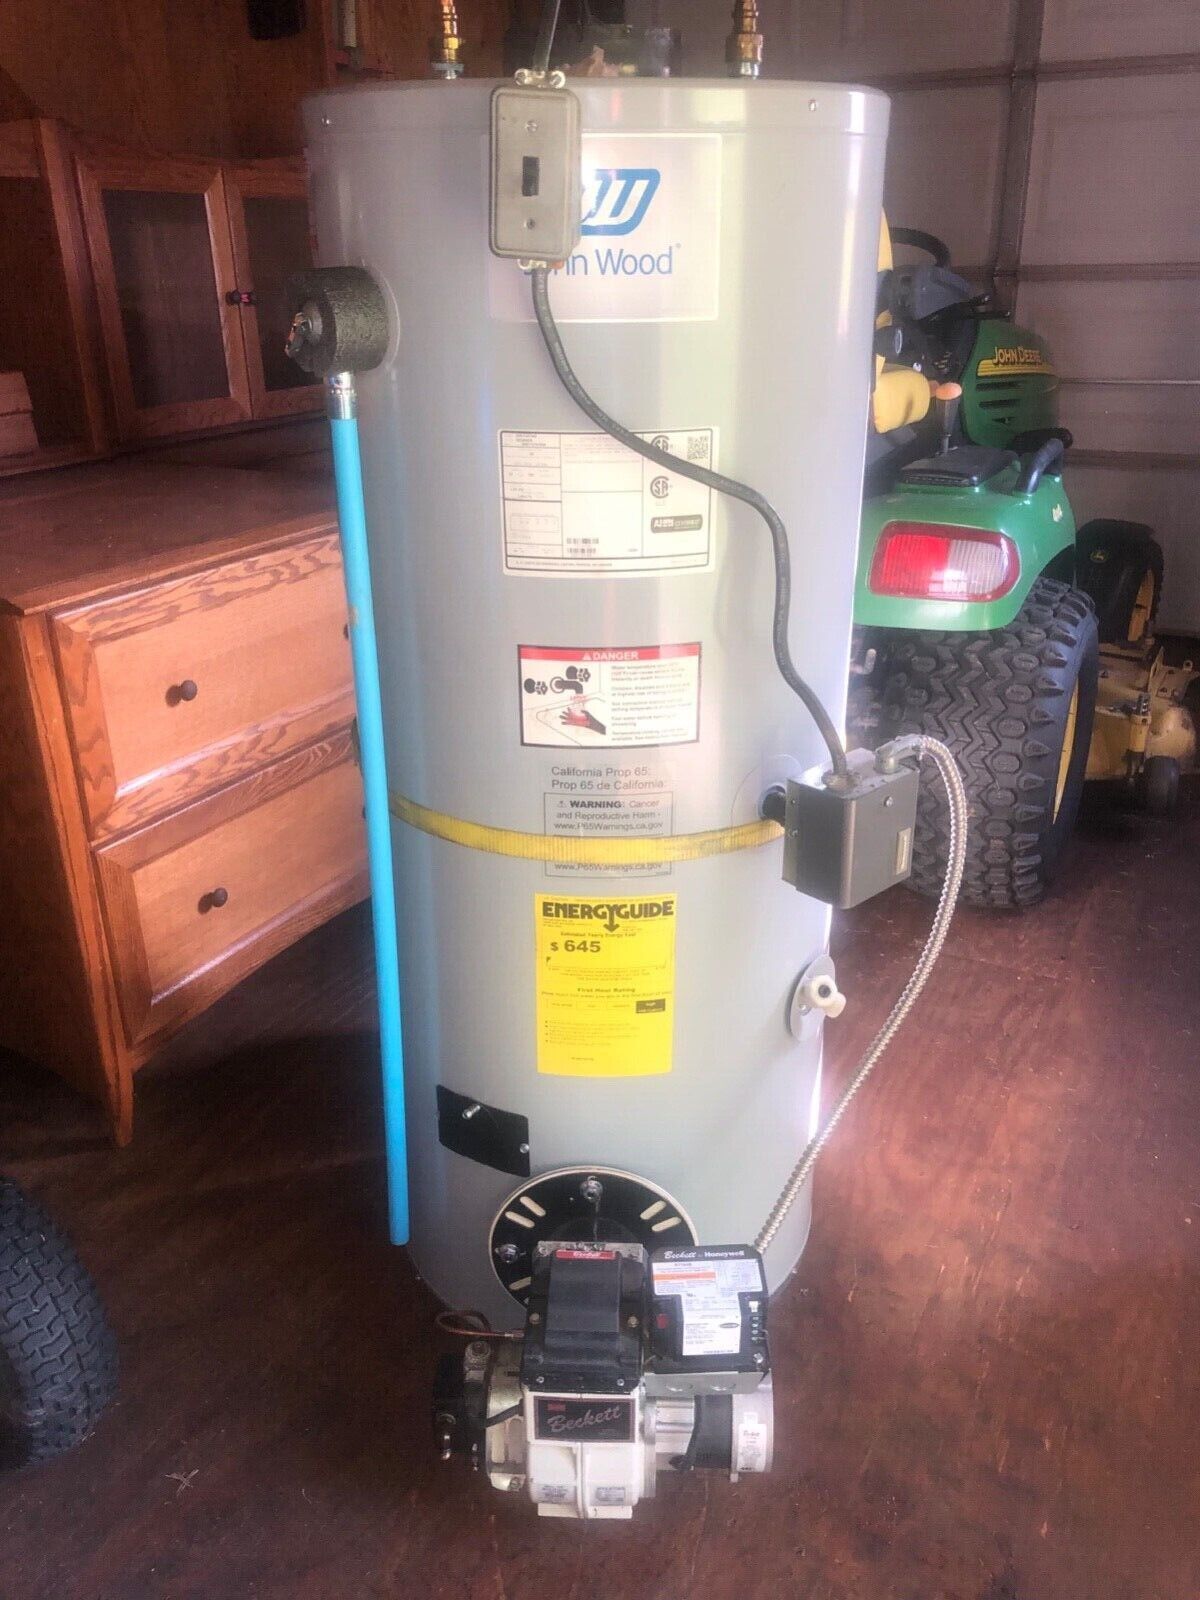 John Wood 30 Gallon Oil Fired Water Heater Complete With Beckett Burner